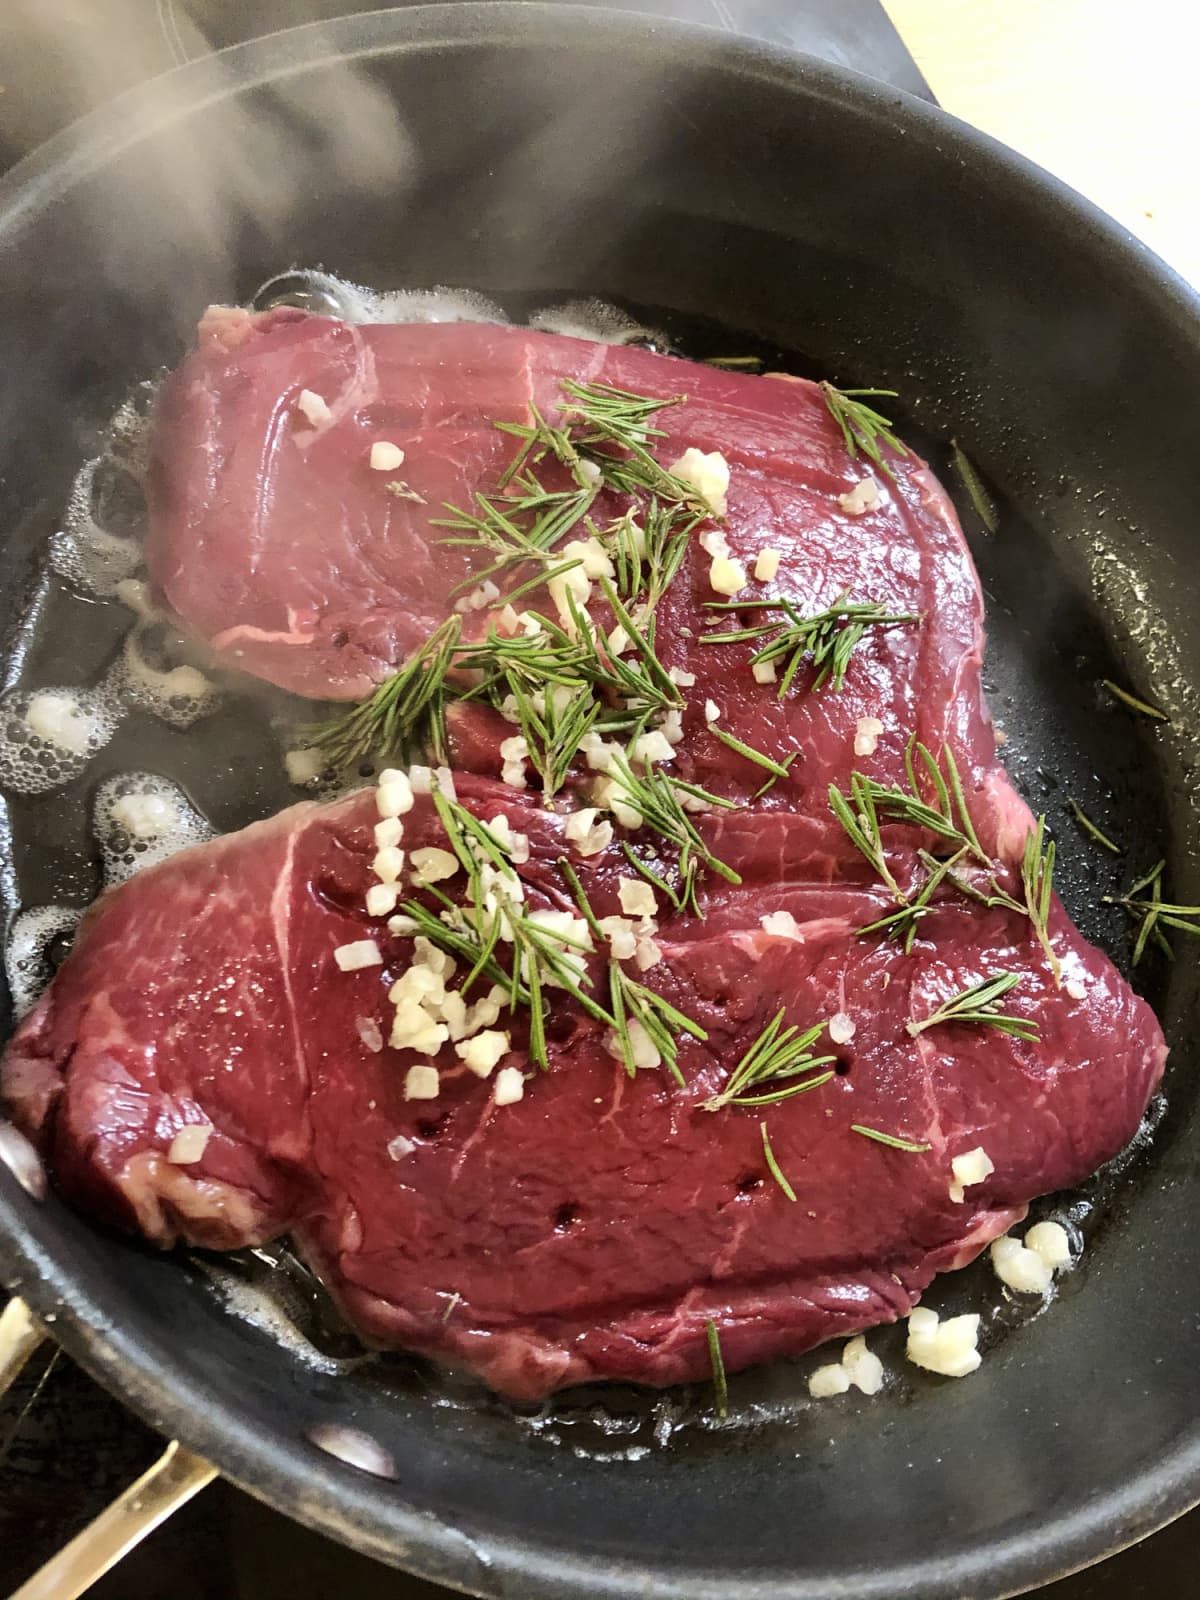 Stock photo showing an elevated view of a smoking hot frying pan containing a raw rump steak seasoned with Garlic and Rosemary.